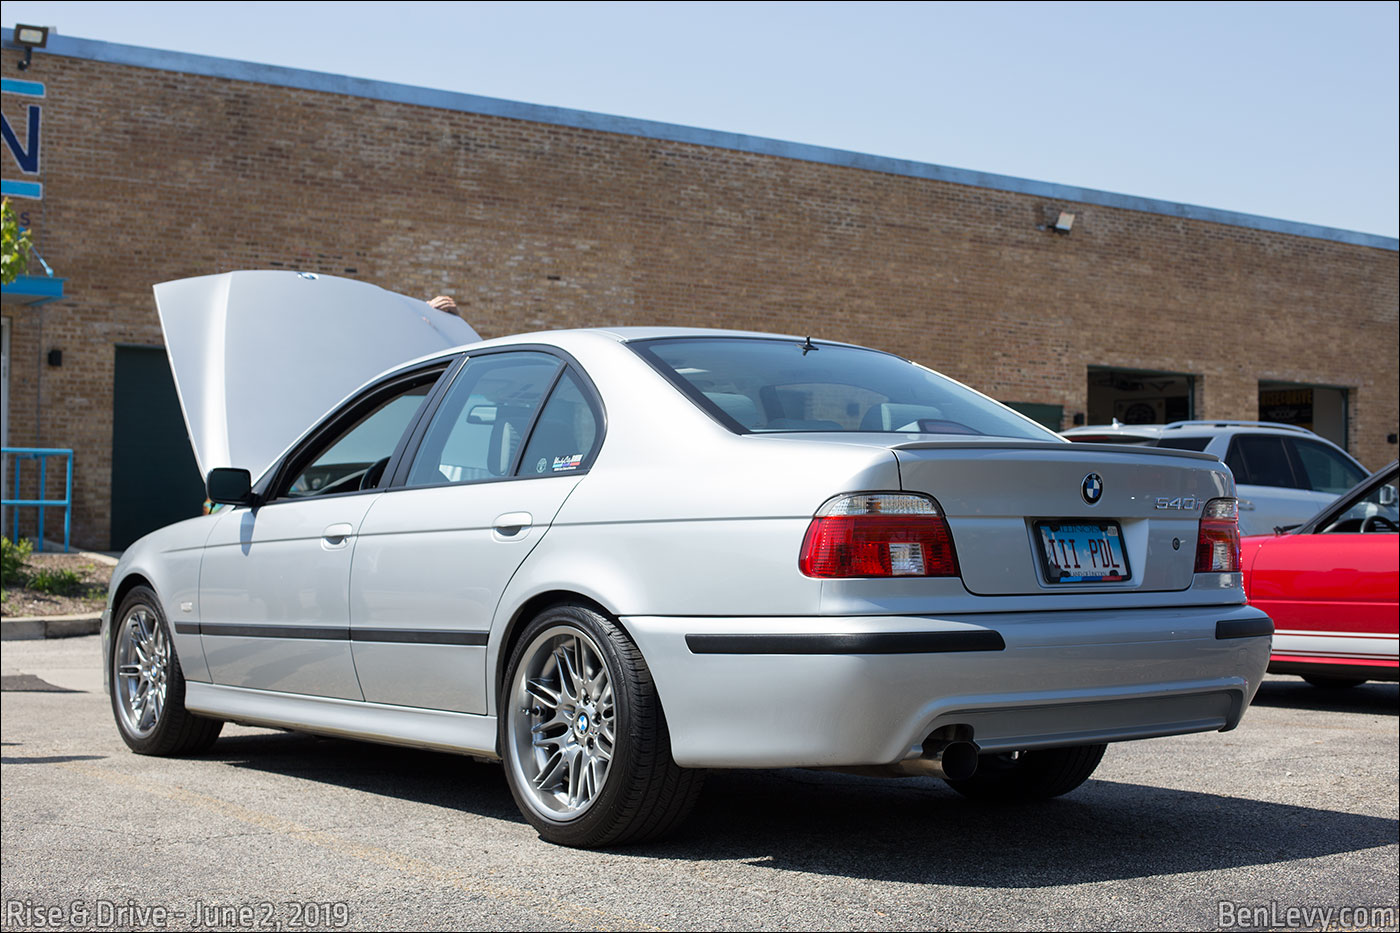 Silver E39 BMW 540i with MSport package